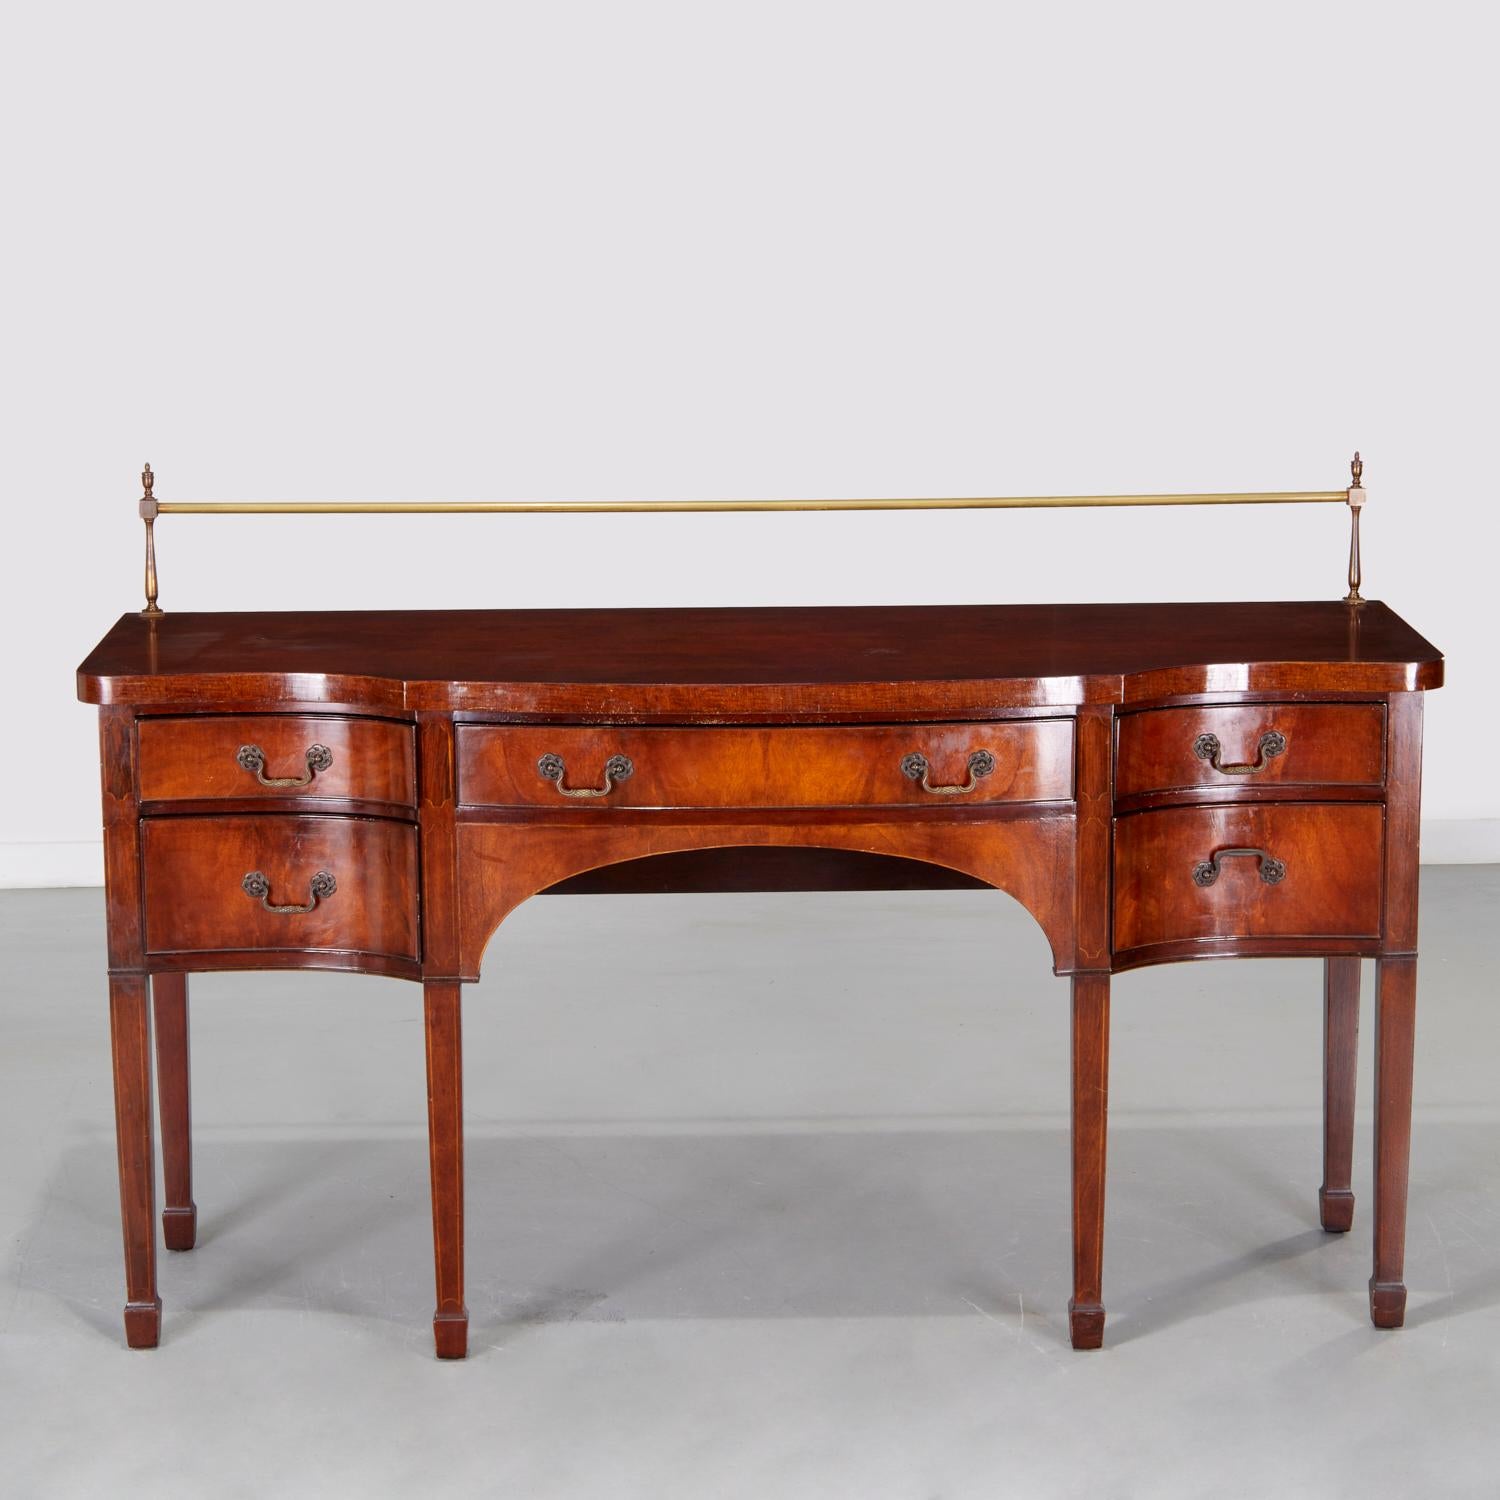 20th c., Federal style mahogany sideboard, possibly Baker, with original brass rail gallery, shaped front, inlaid stringing, and original brass drawer pulls, unmarked. While this may be considered a somewhat subdued version of a sideboard of this